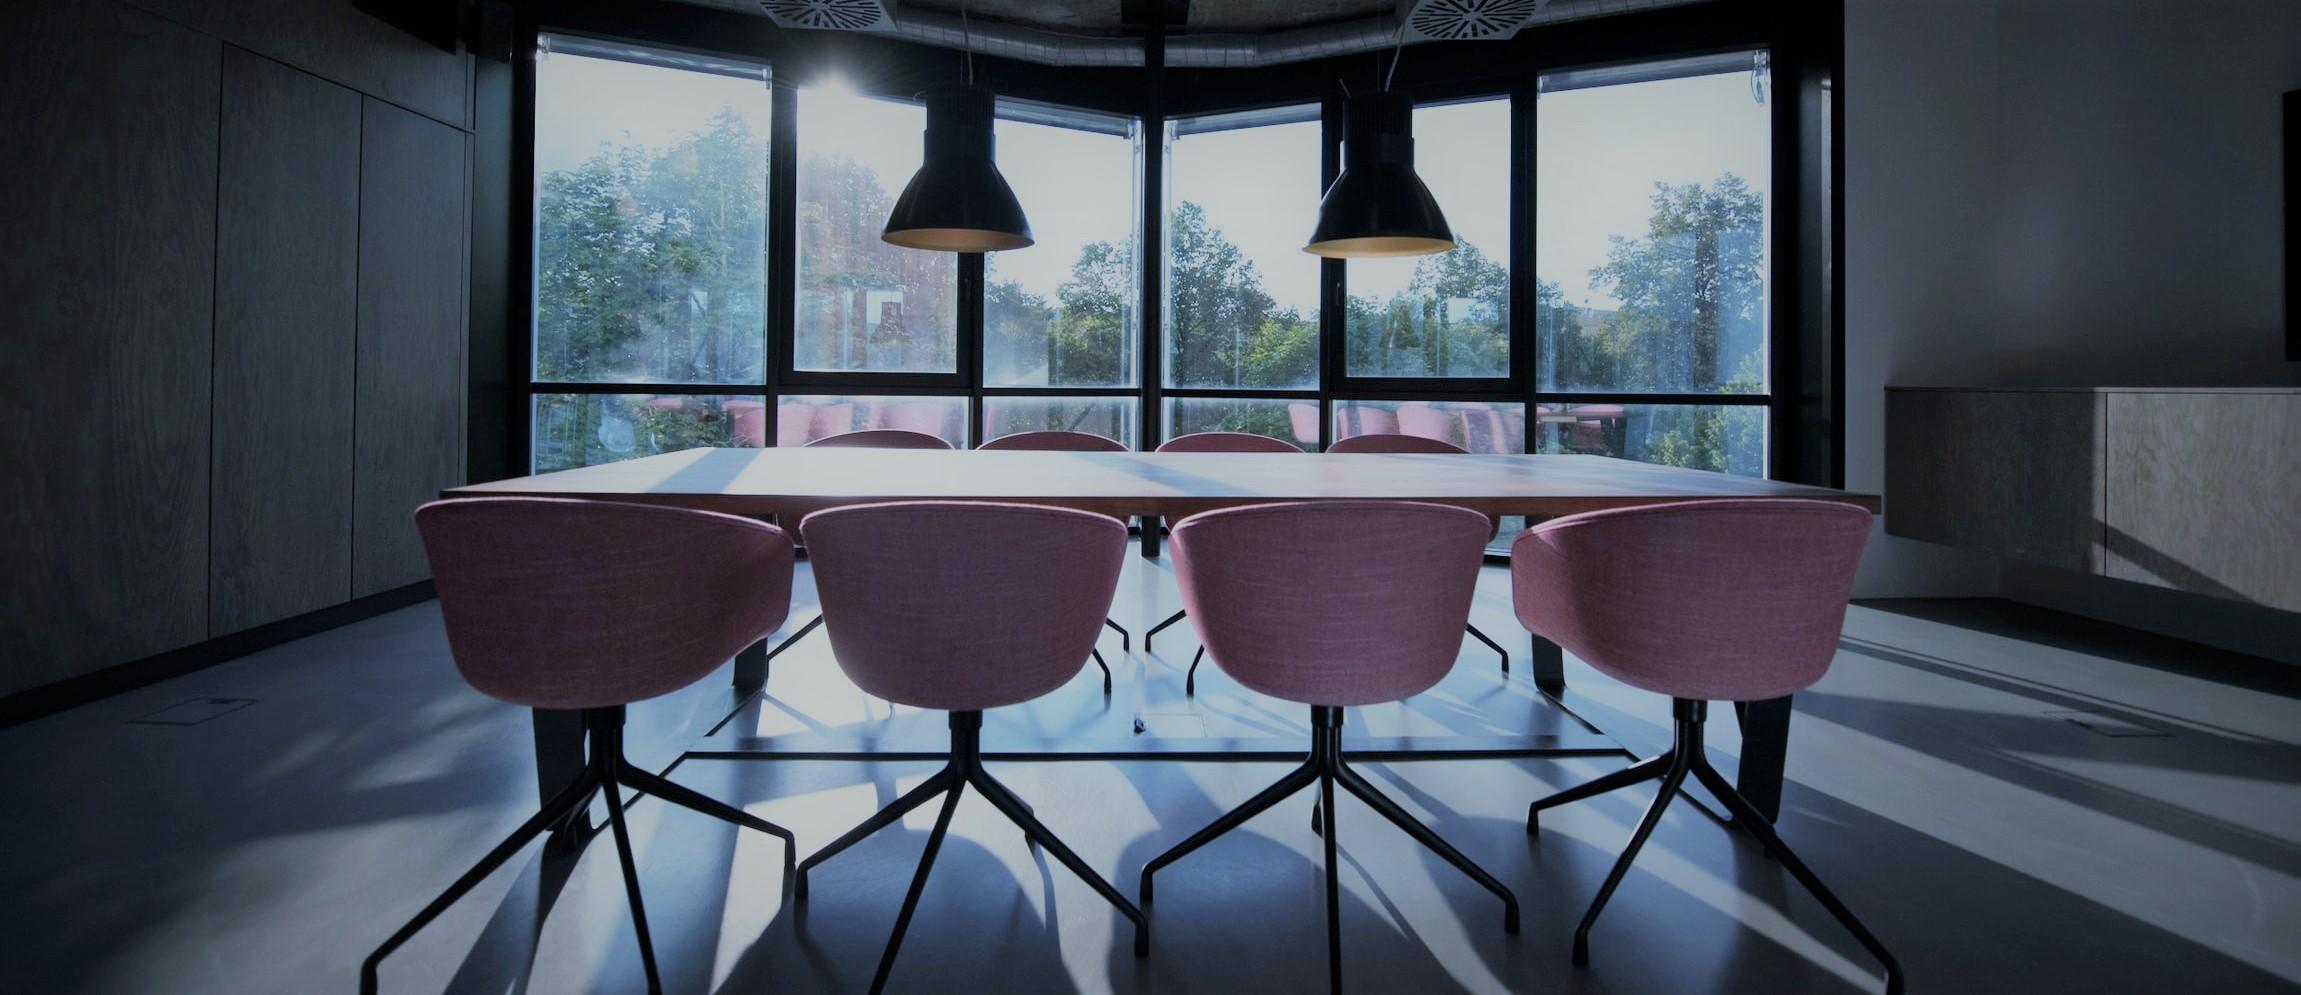 An empty boardroom table and chairs in front of a window